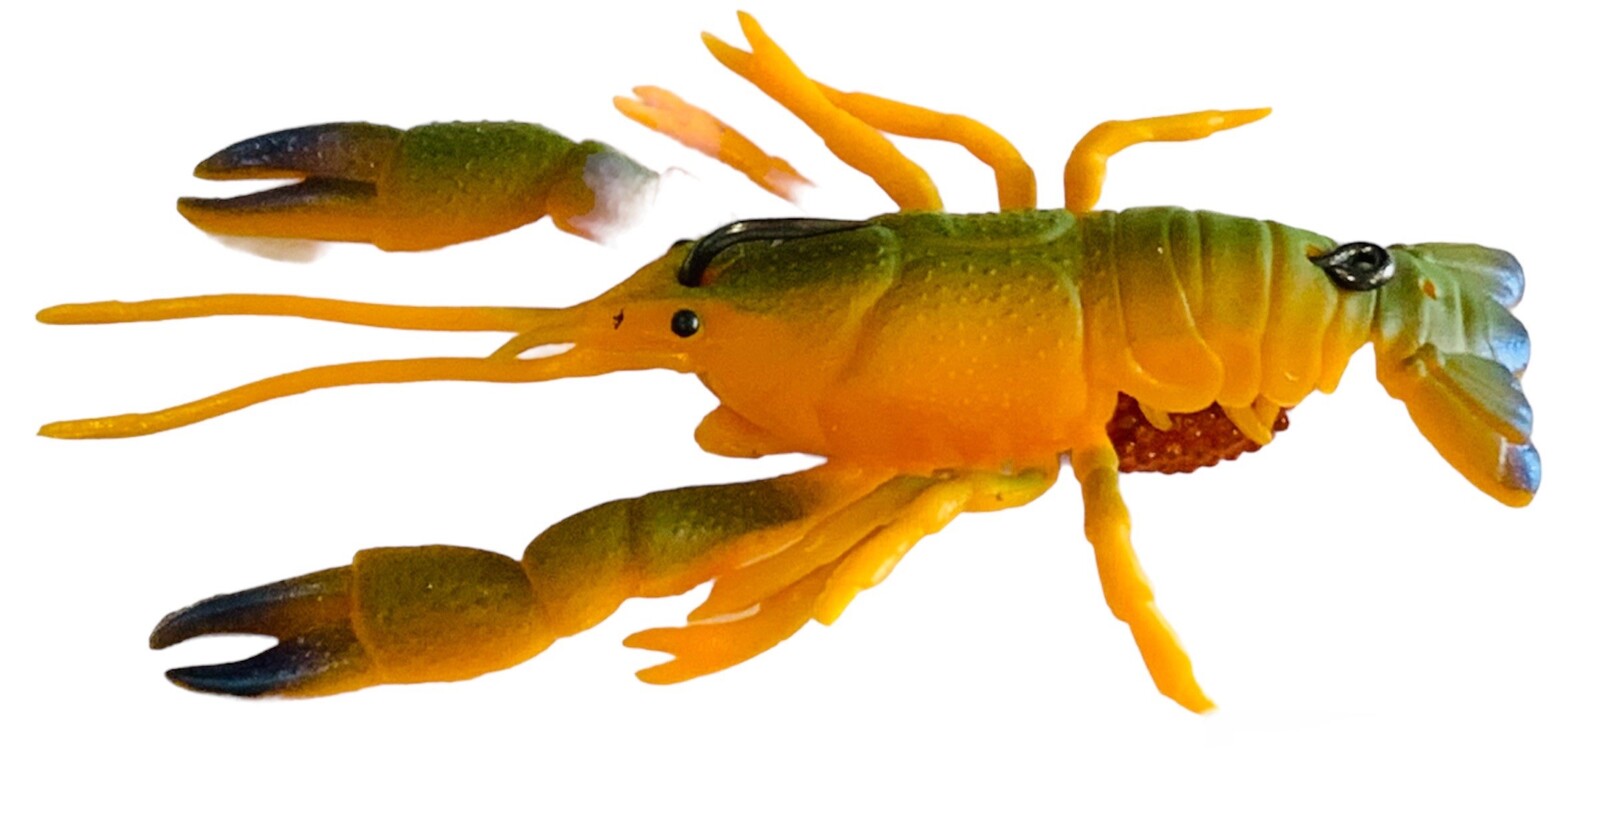 Multiple Variations of Grand Lively Crayfish for Sale